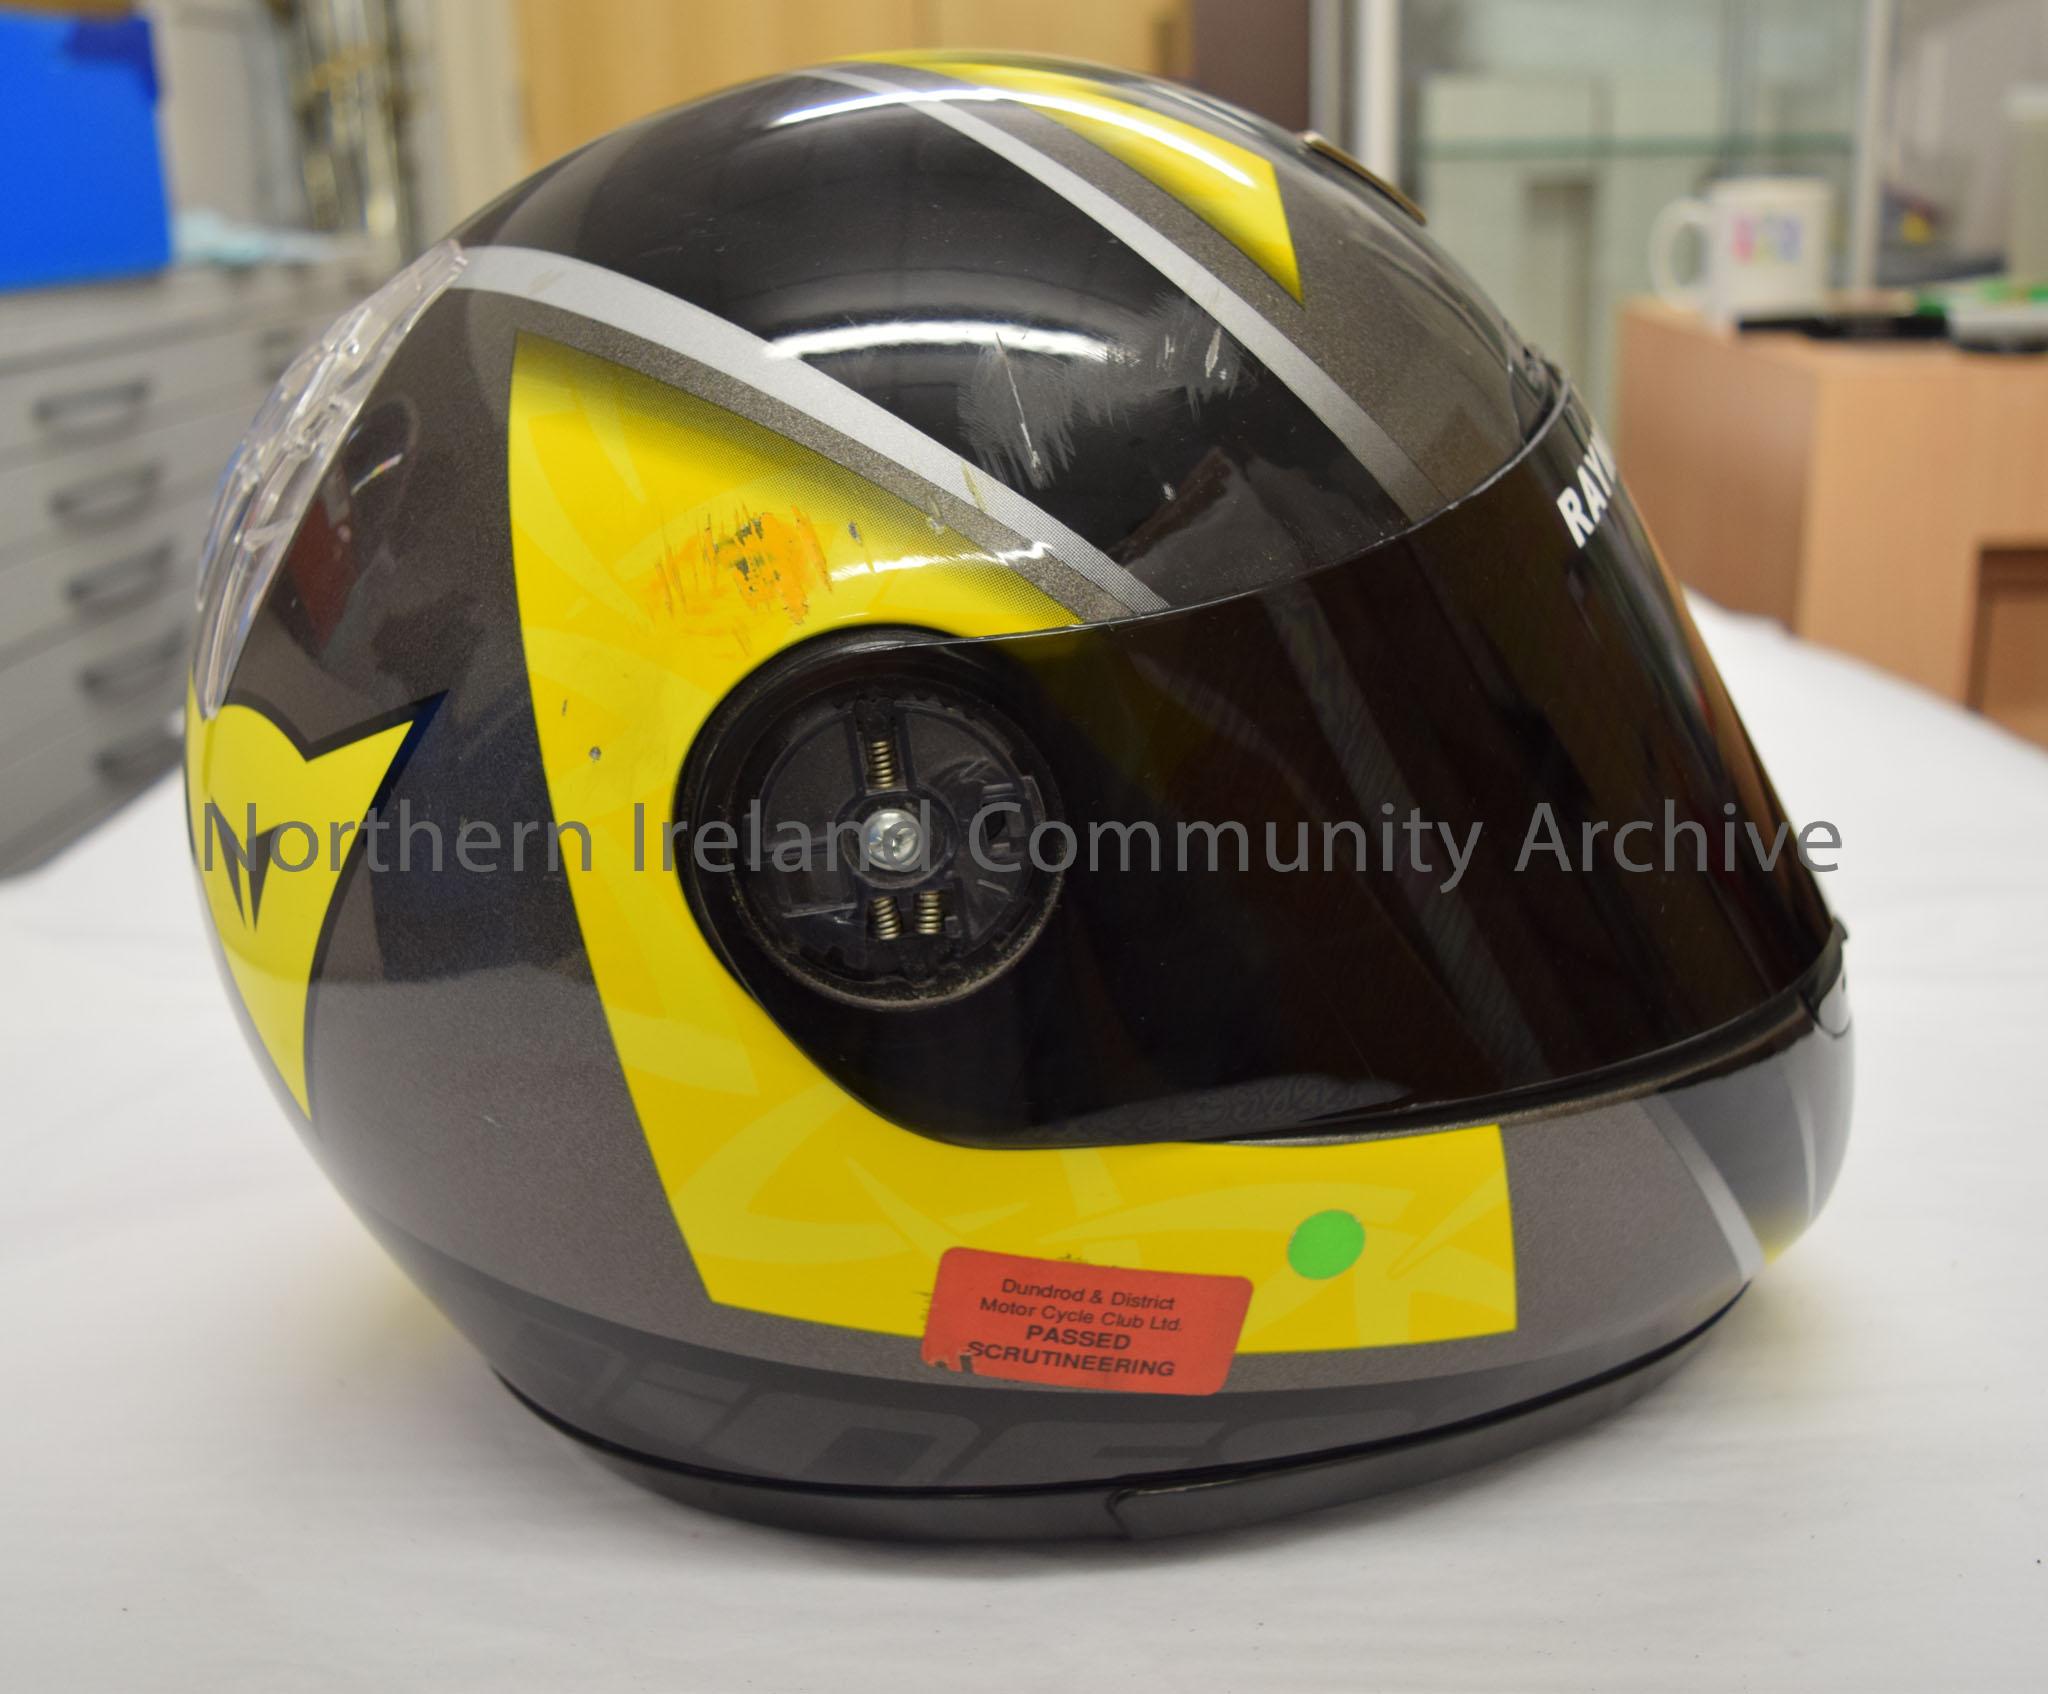 Dainese motorcycle helmet belonging to Raymond Hodge. Black, silver and yellow helmet with black visor and triangular shaped logo on the front. – 2016.12 (5)